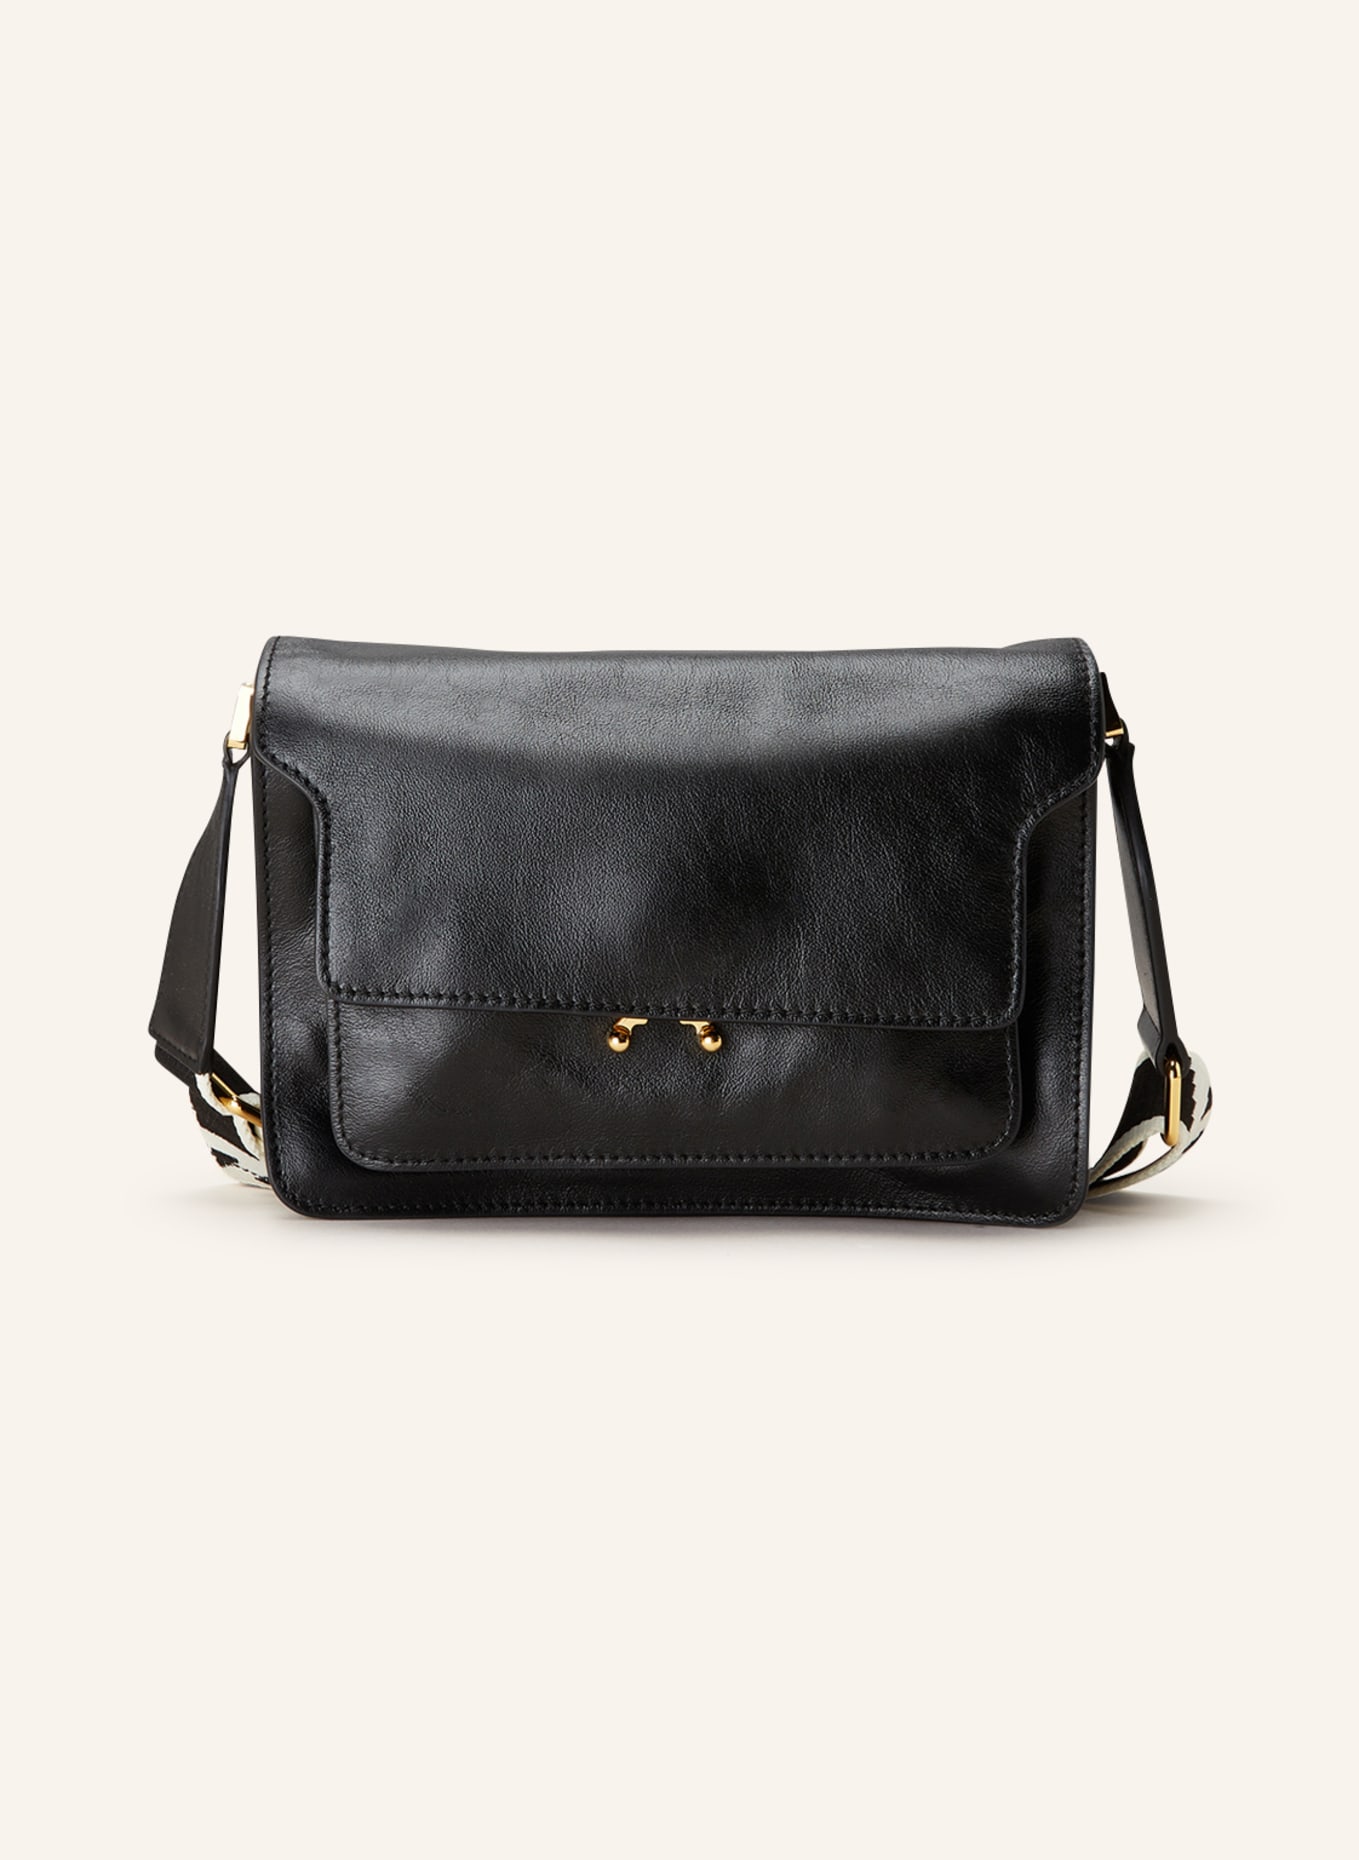 Trunk Soft Medium Bag in black and white leather, Marni in 2023